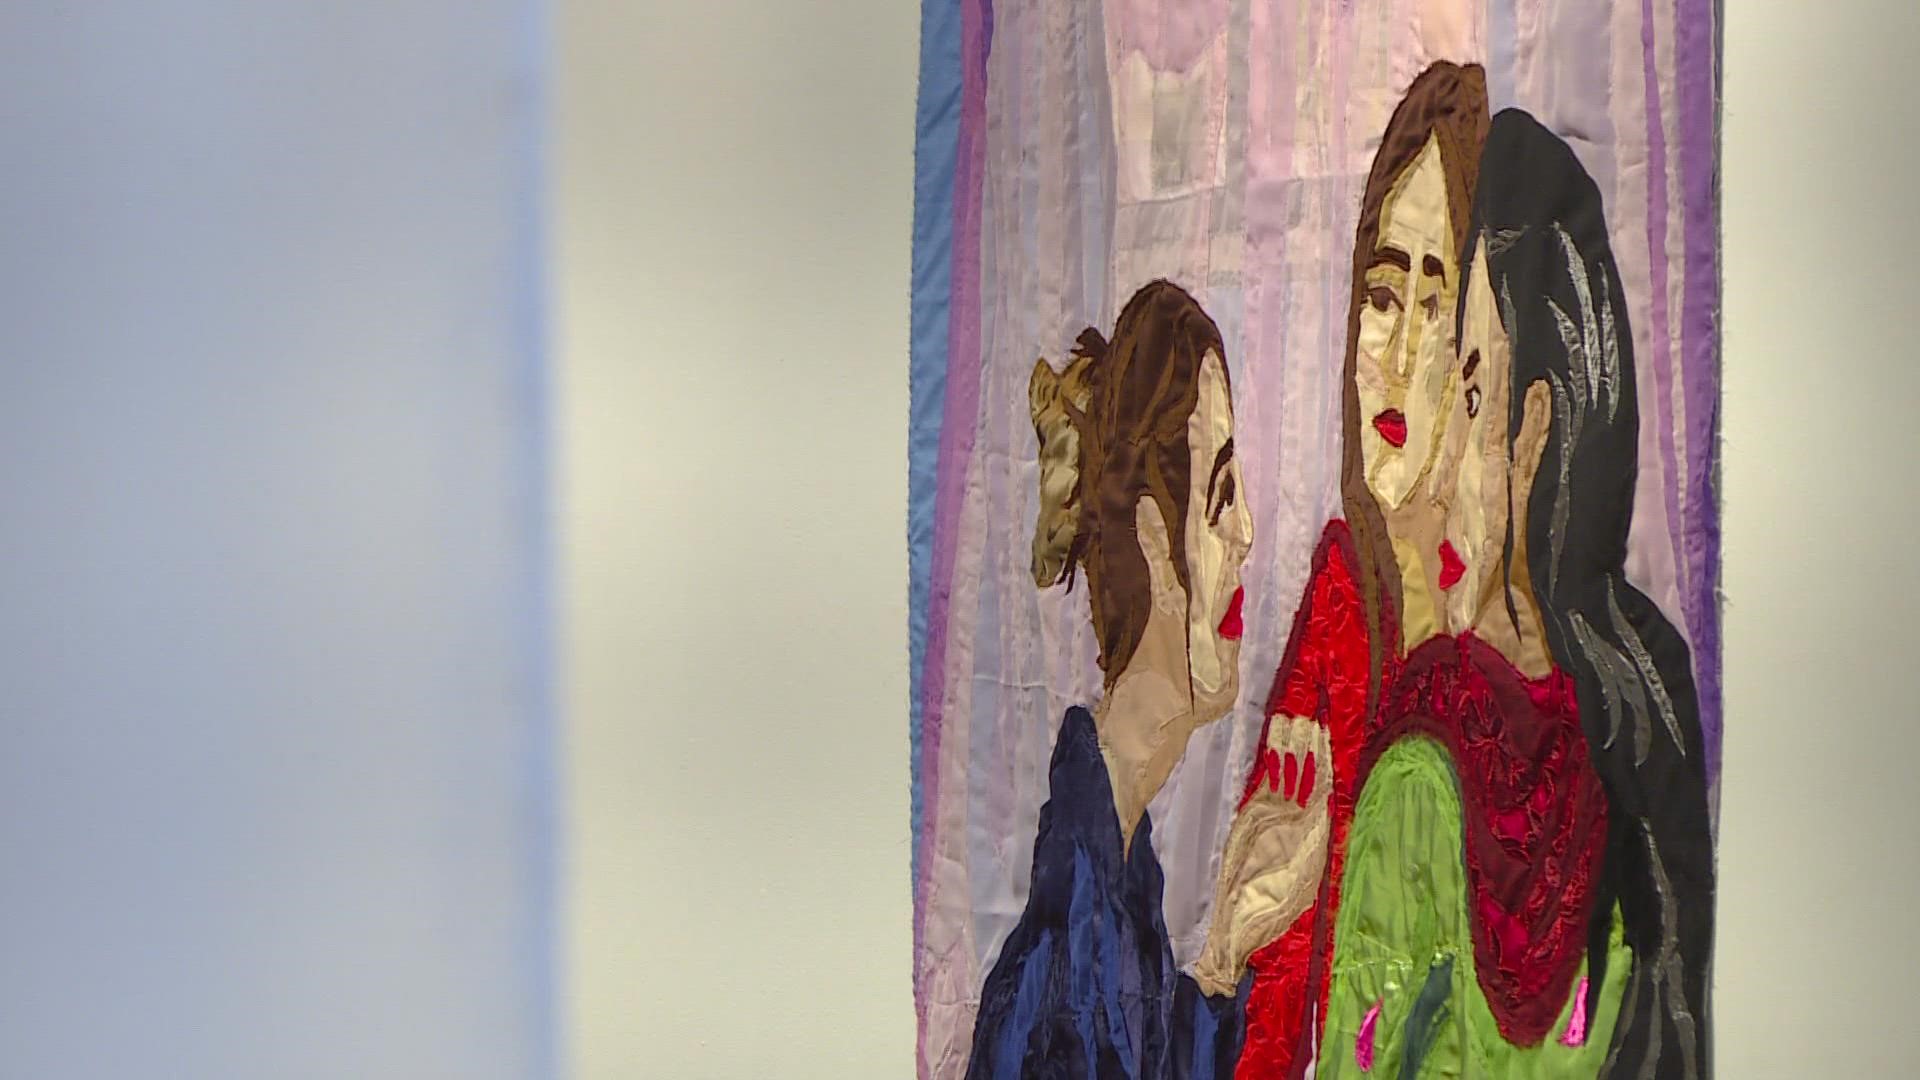 Hangama Amiri has become the first living Afghan to have her work on display in the museum.